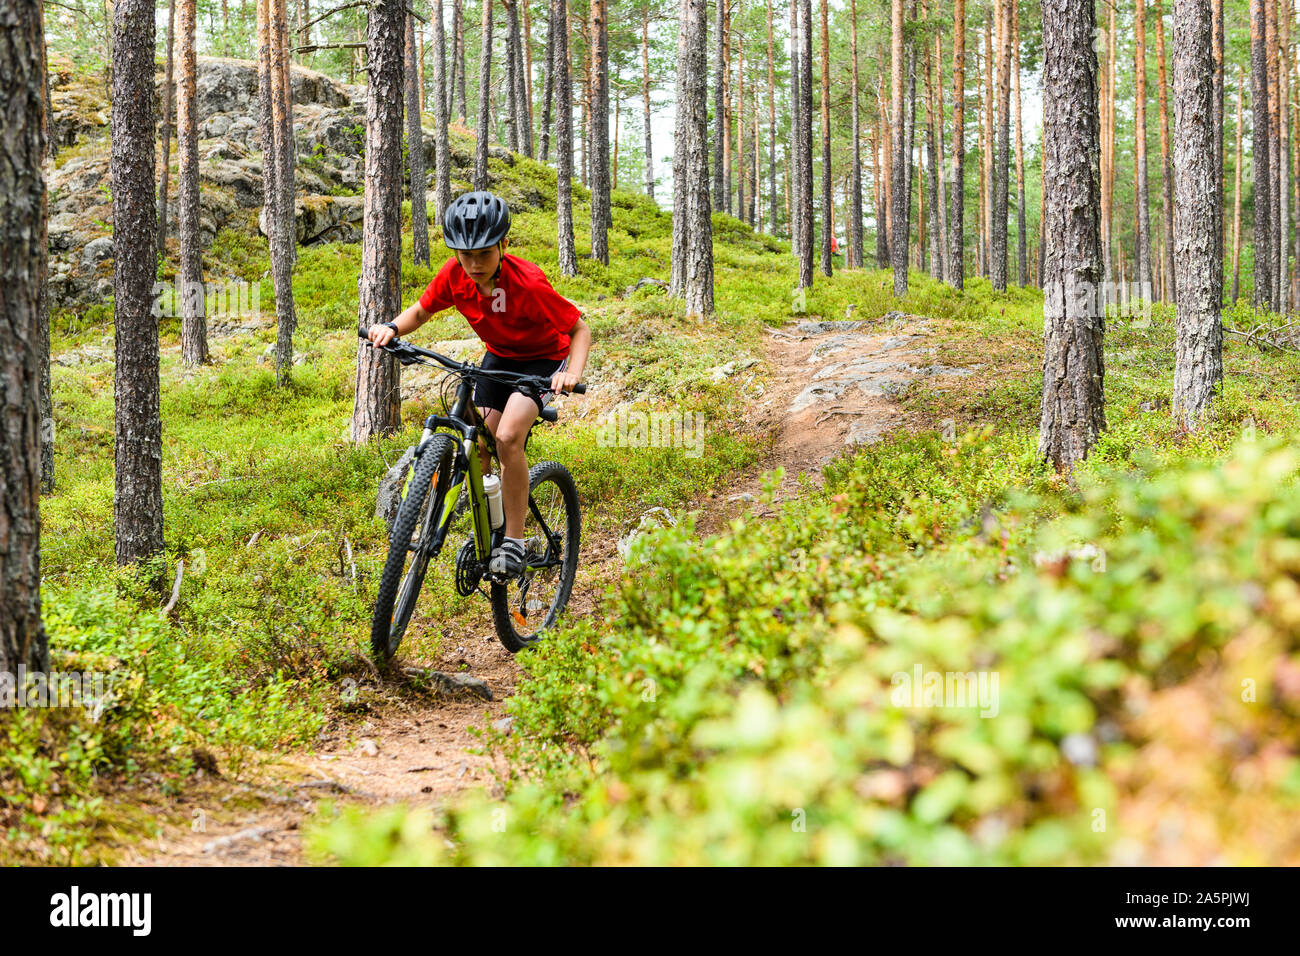 Boy cycling through forest Stock Photo